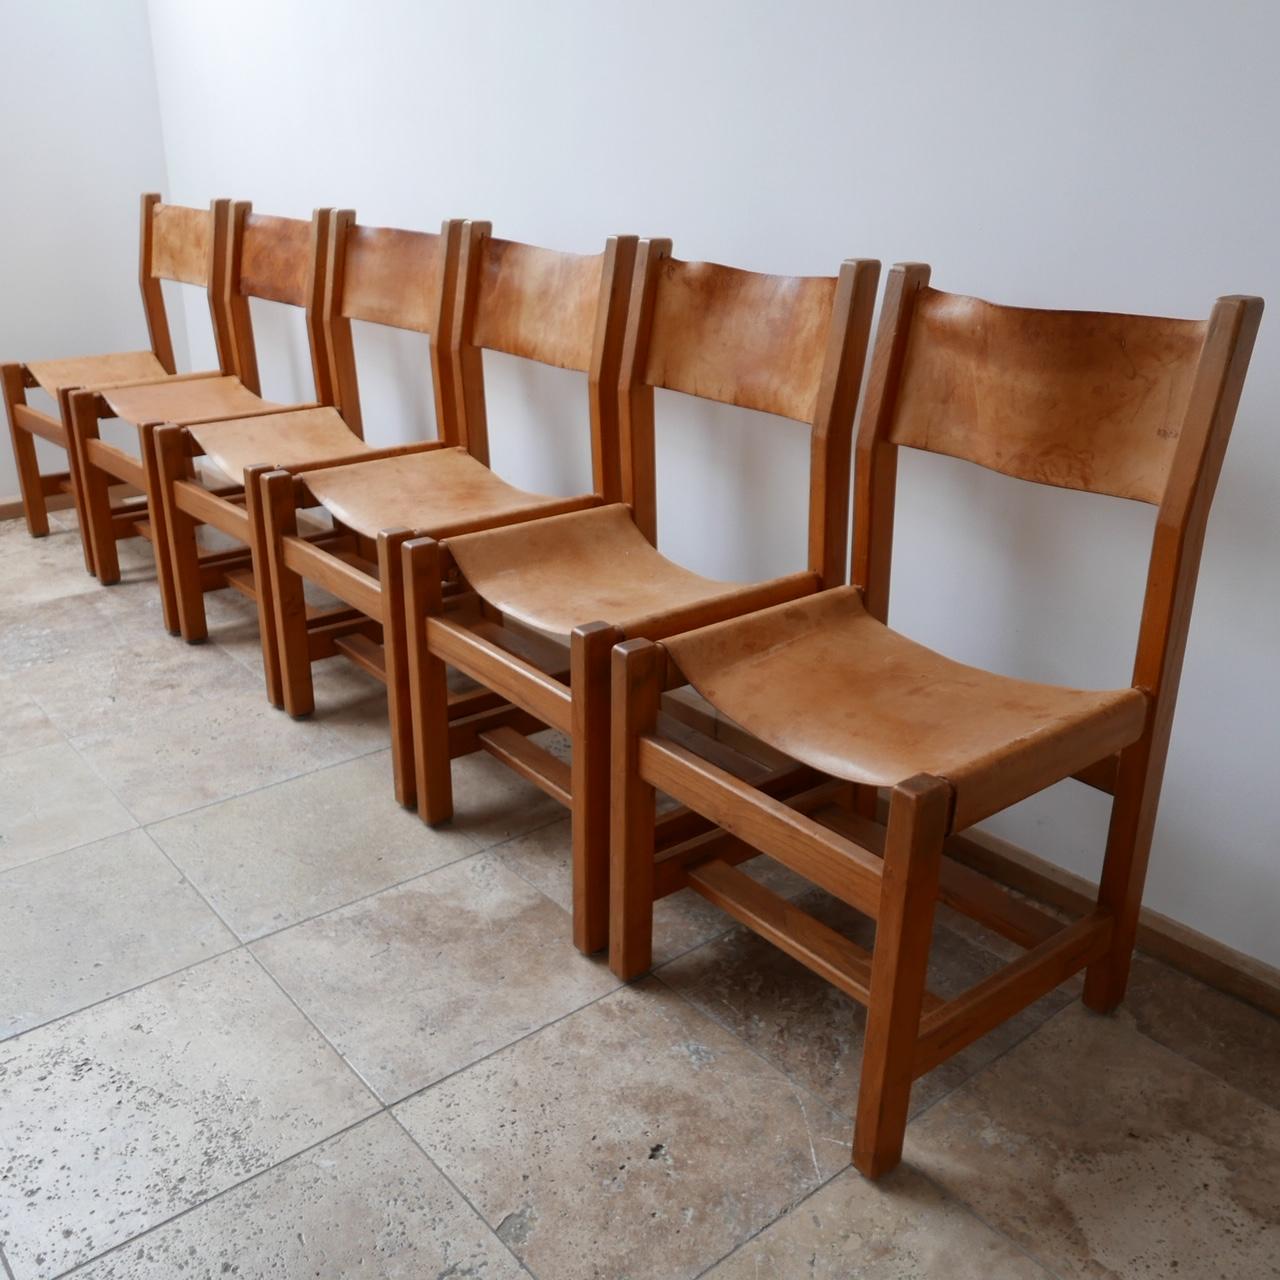 German Maison Regain Elm and Leather Midcentury Dining Chairs, '6'